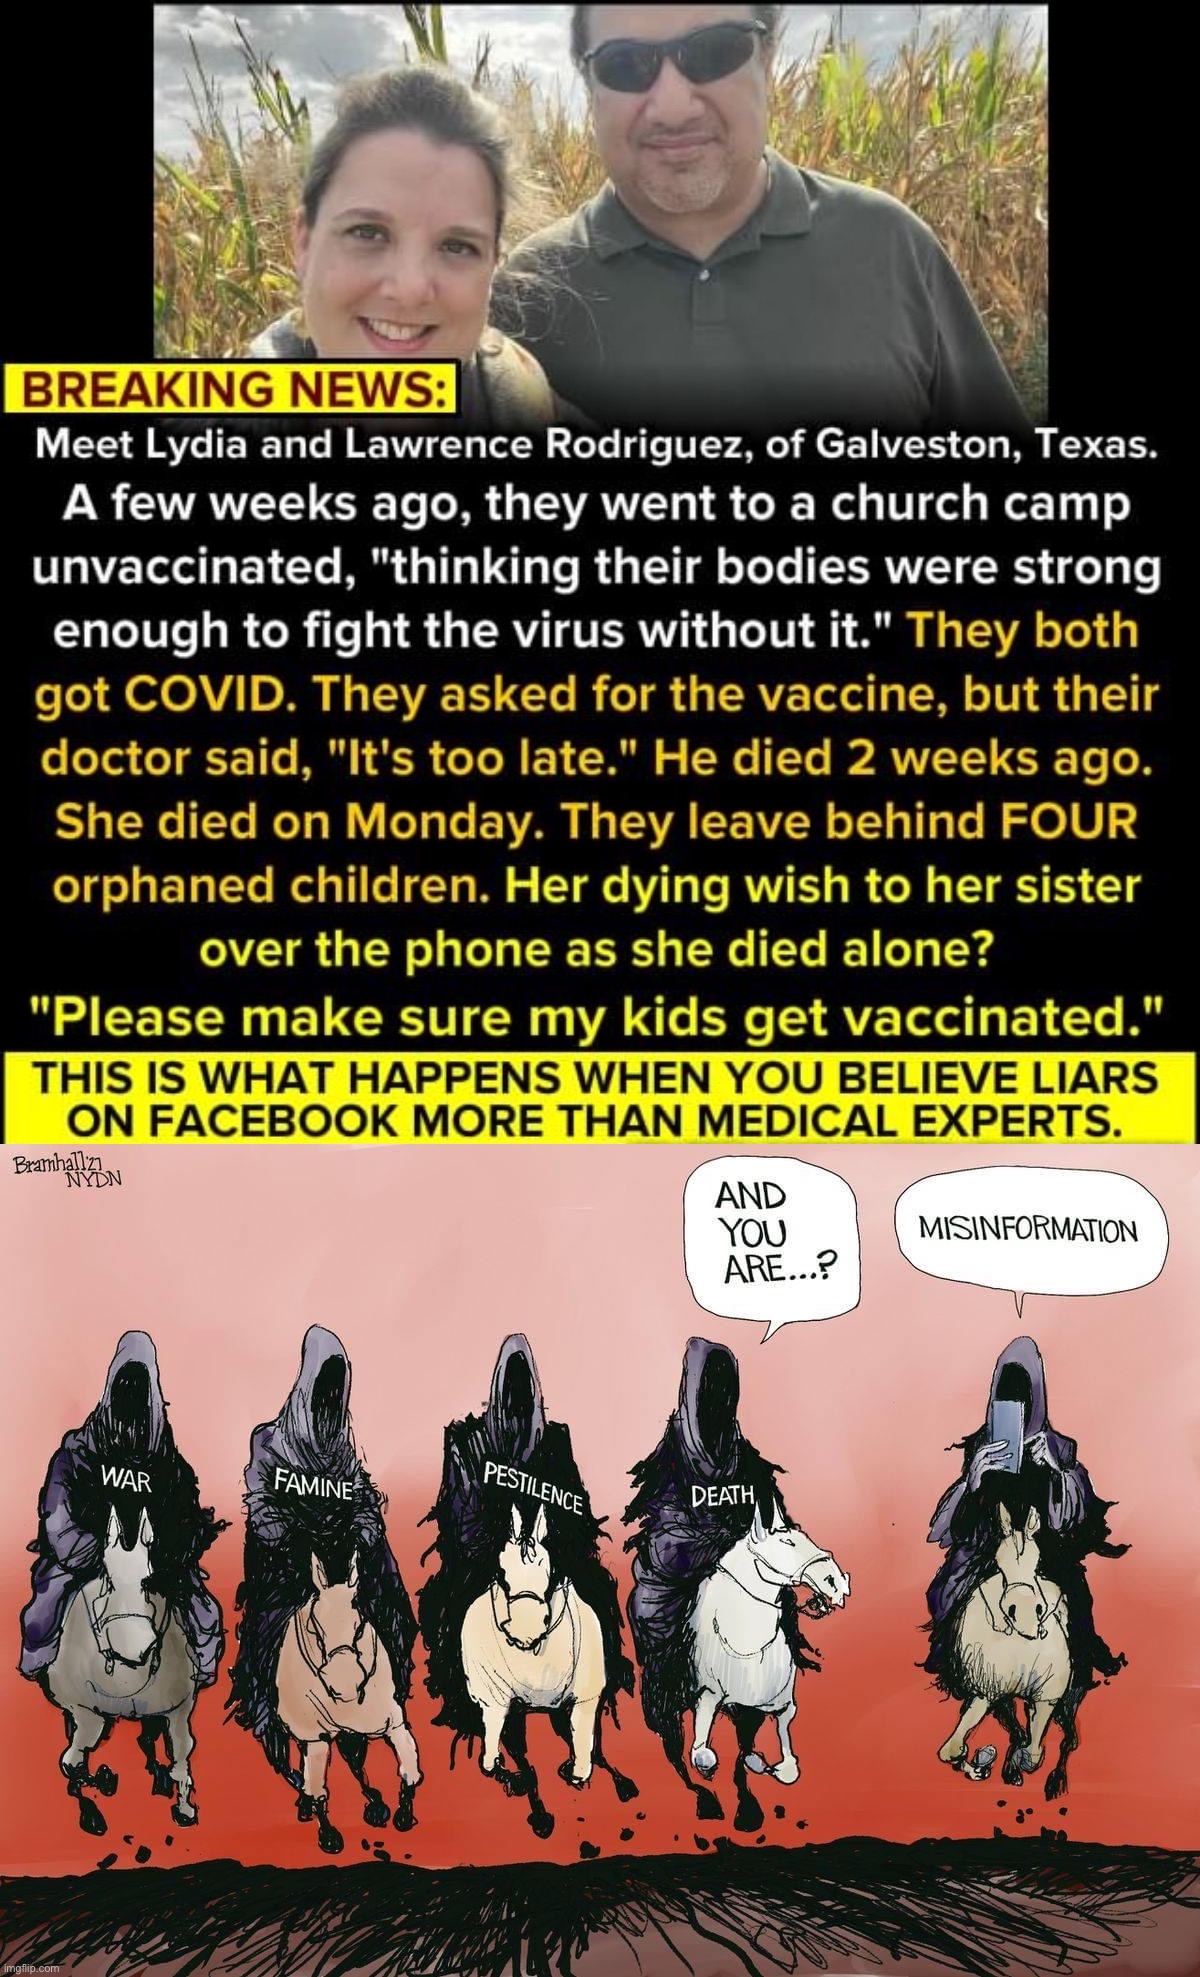 I don’t feel sorry for them. I feel sorry for their children. | image tagged in covidiots orphan their children,five horsemen,covidiots,covid-19,coronavirus,orphans | made w/ Imgflip meme maker